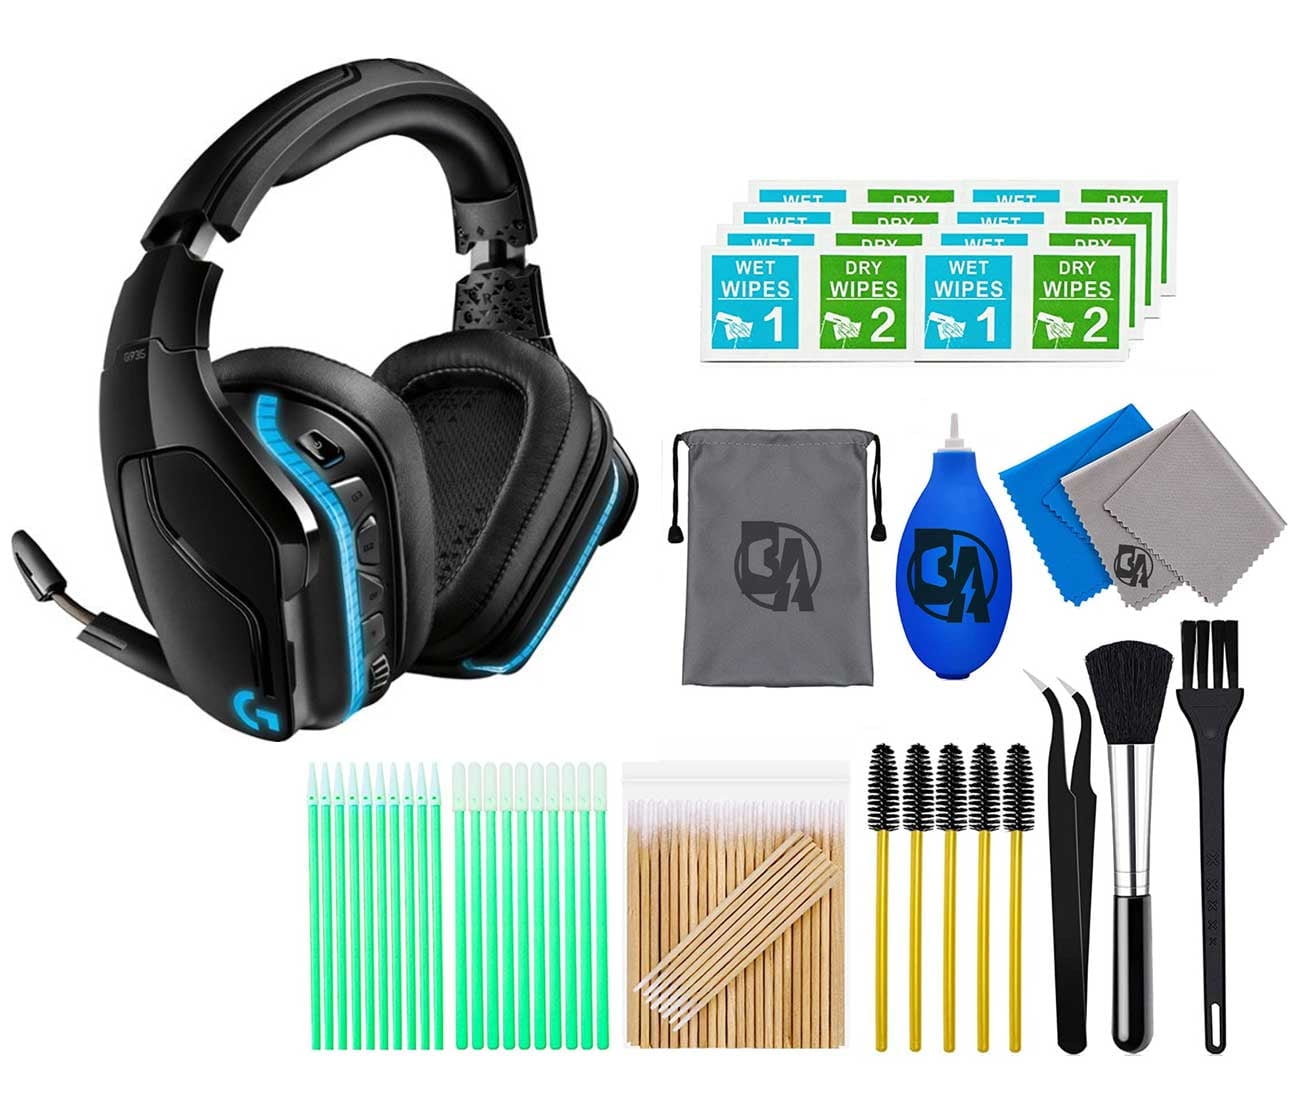 Logitech G935 Wireless 7.1 Surround Sound Over-the-Ear Gaming Headset  Black/Blue With Cleaning Kit Bolt Axtion Bundle Used